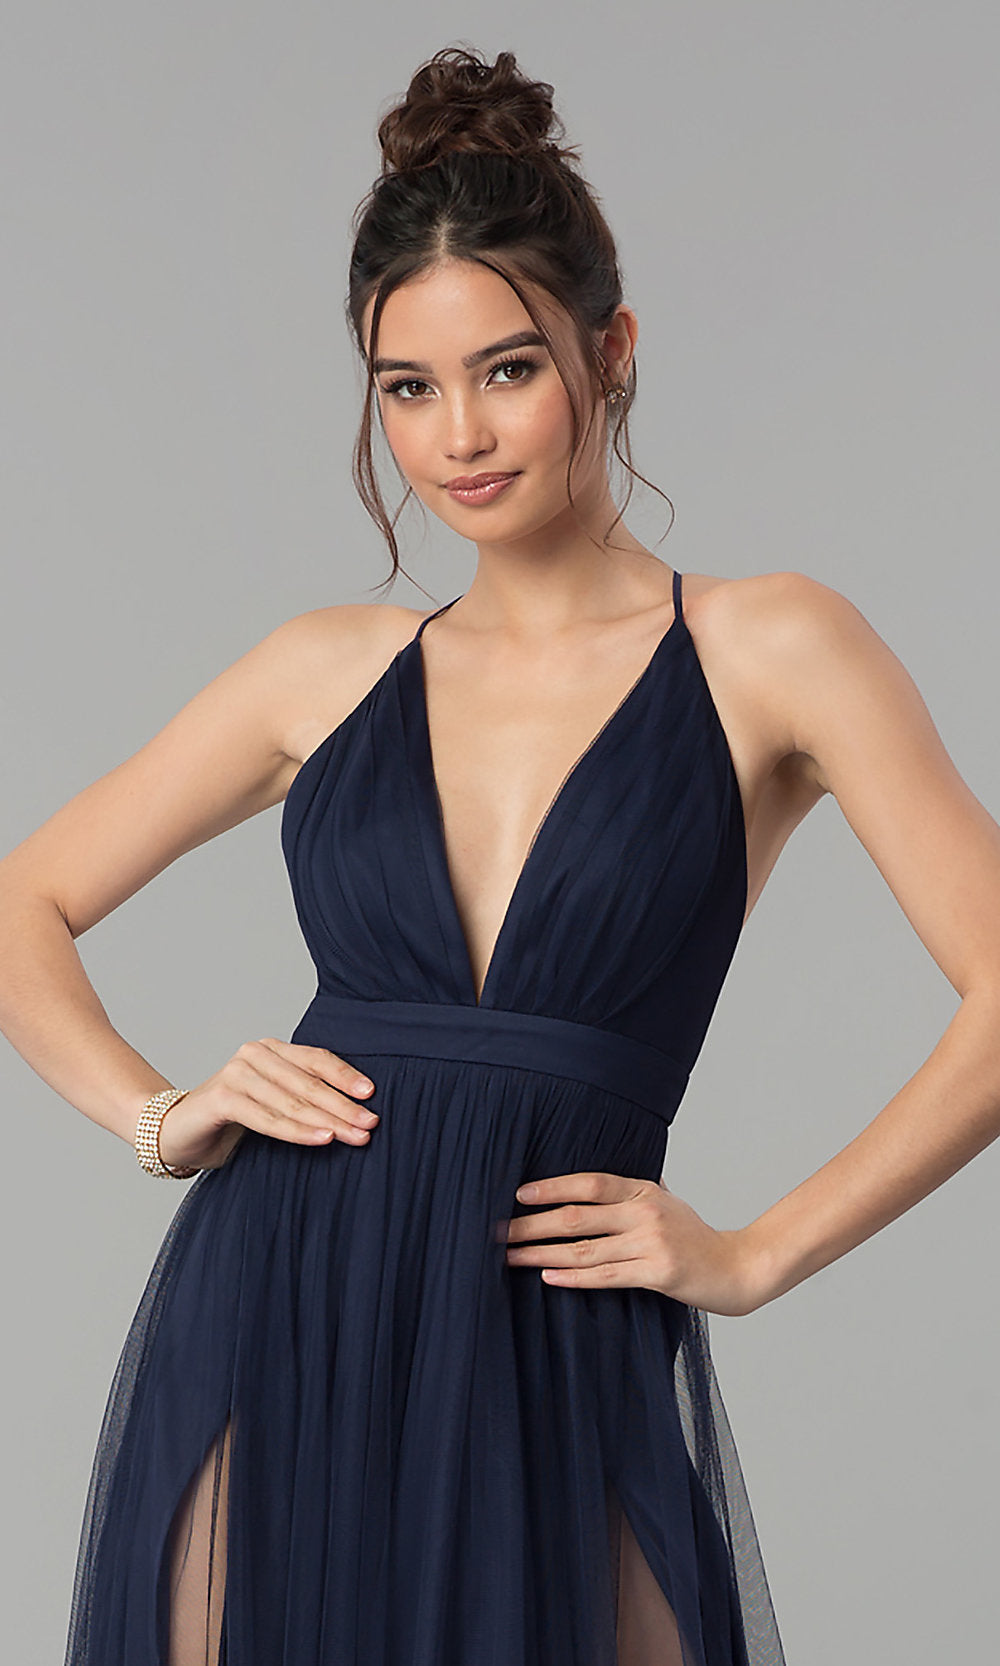 Low-Cut Deep V-Neck Prom Dresses for 2019 - Sparkle Prom